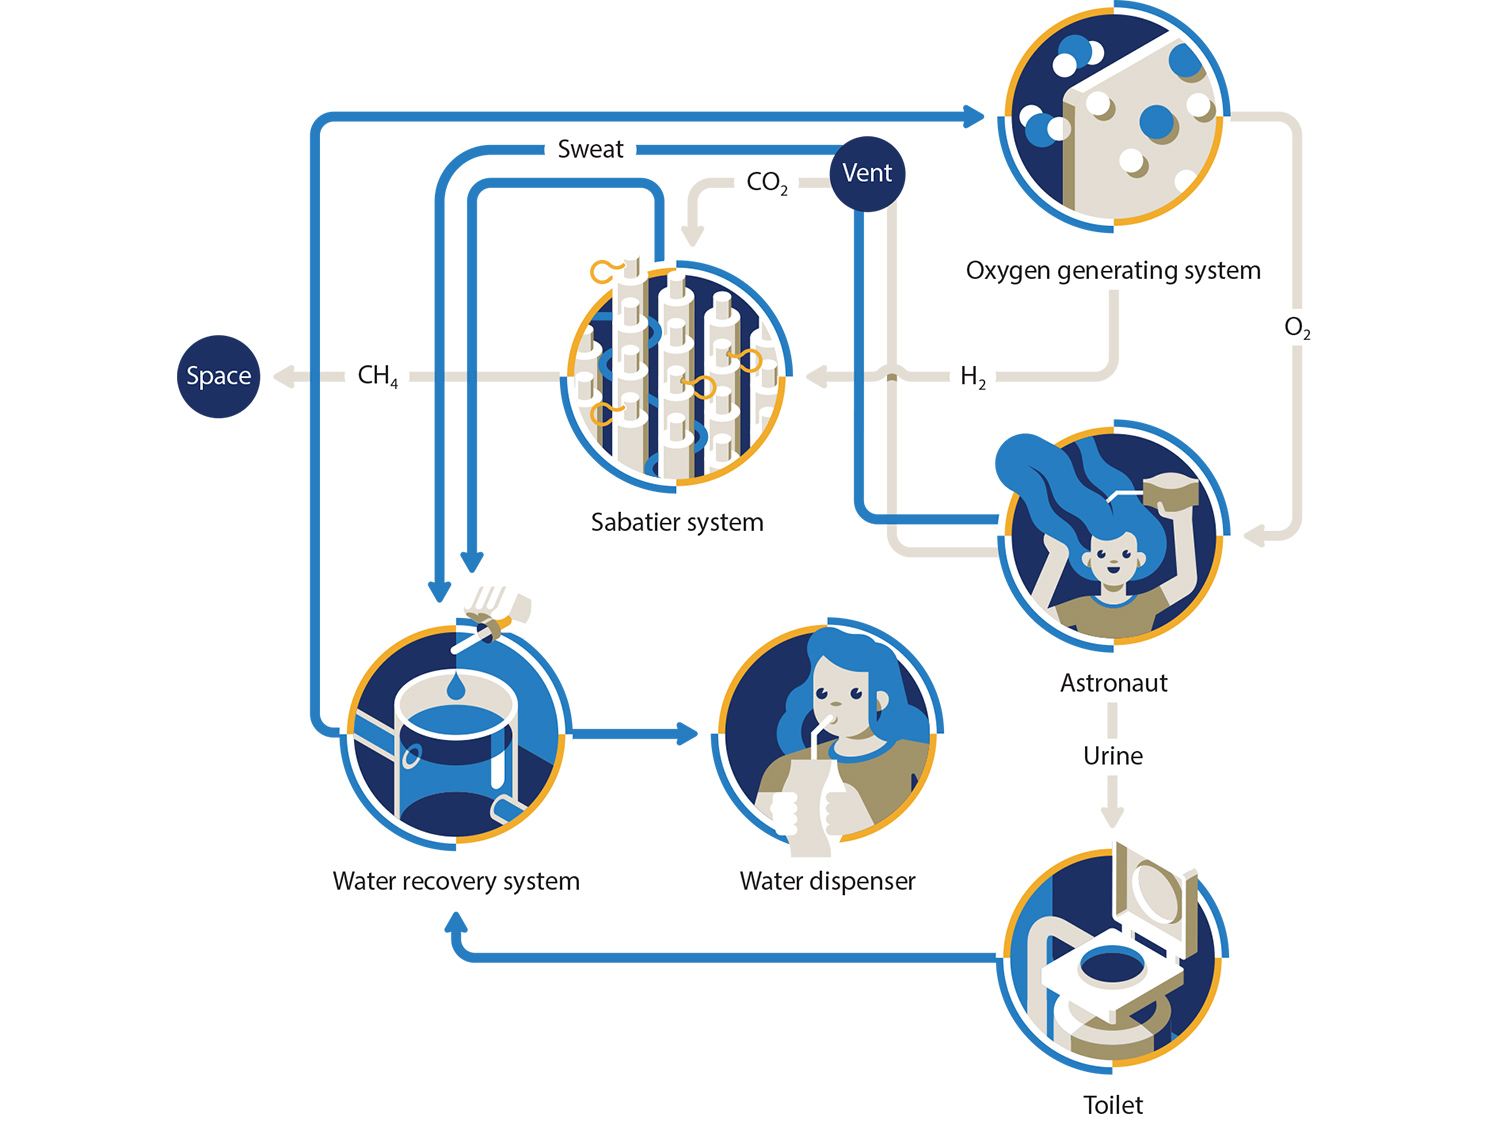 How the ISS recycles its air and water